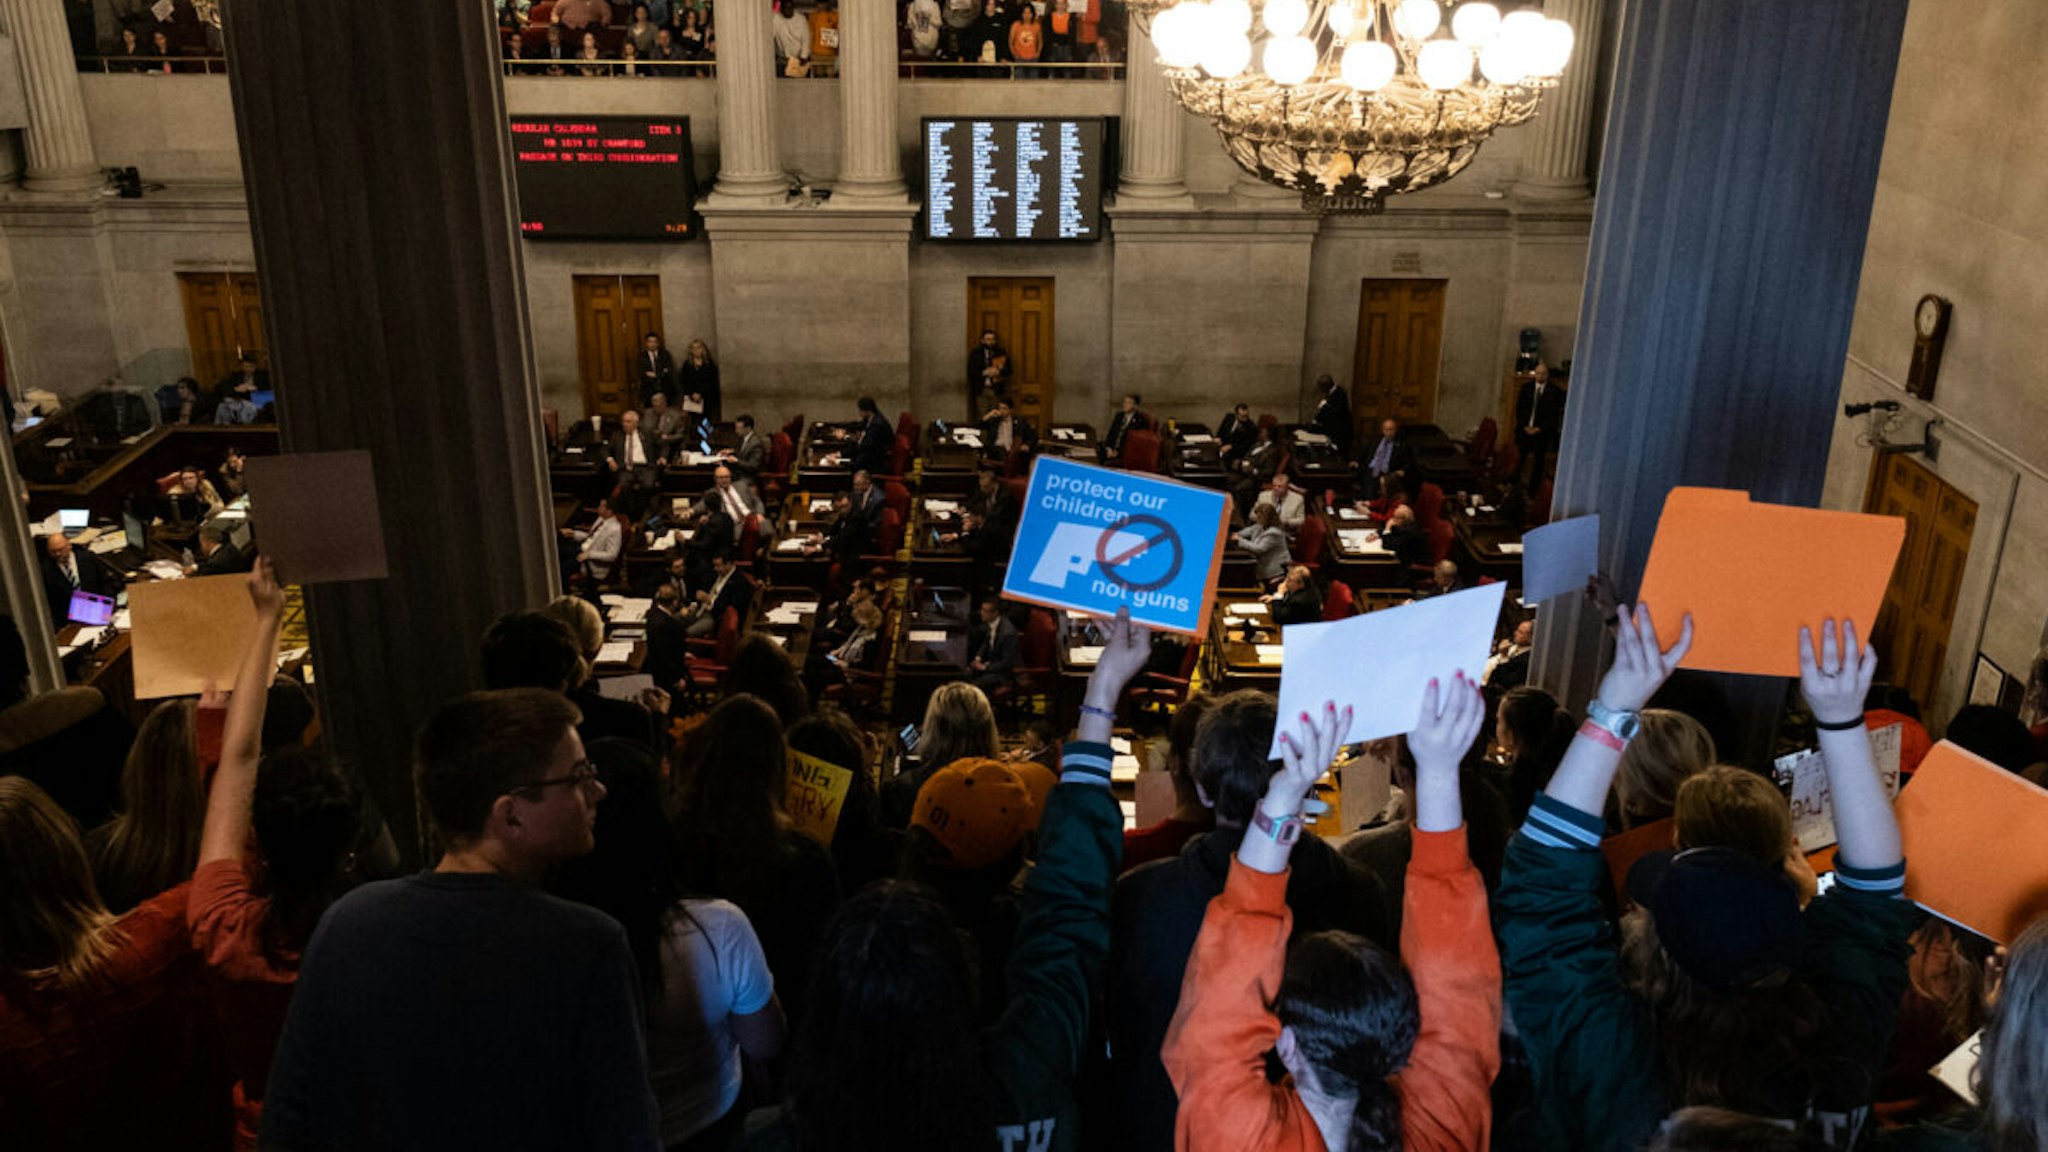 NASHVILLE, TN - MARCH 30: Protesters gather inside the Tennessee State Capitol to call for an end to gun violence and support stronger gun laws on March 30, 2023 in Nashville, Tennessee. A 28-year-old former student of the private Covenant School in Nashville, wielding a handgun and two AR-style weapons, shot and killed three 9-year-old students and three adults before being killed by responding police officers on March 27th.